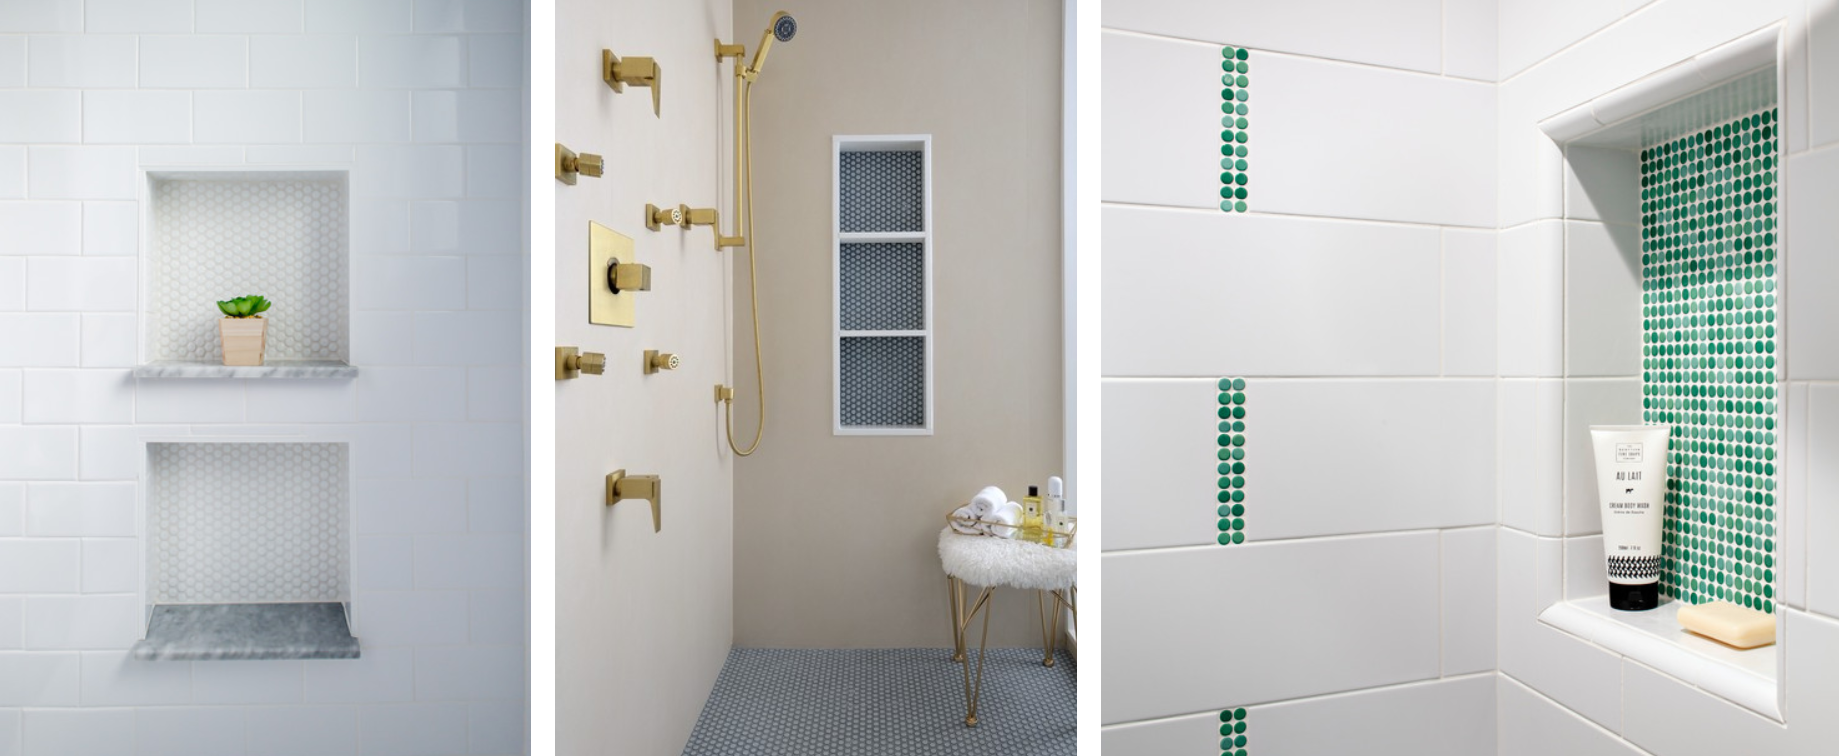 Shower with White Penny Tiles and White Grout - Transitional - Bathroom